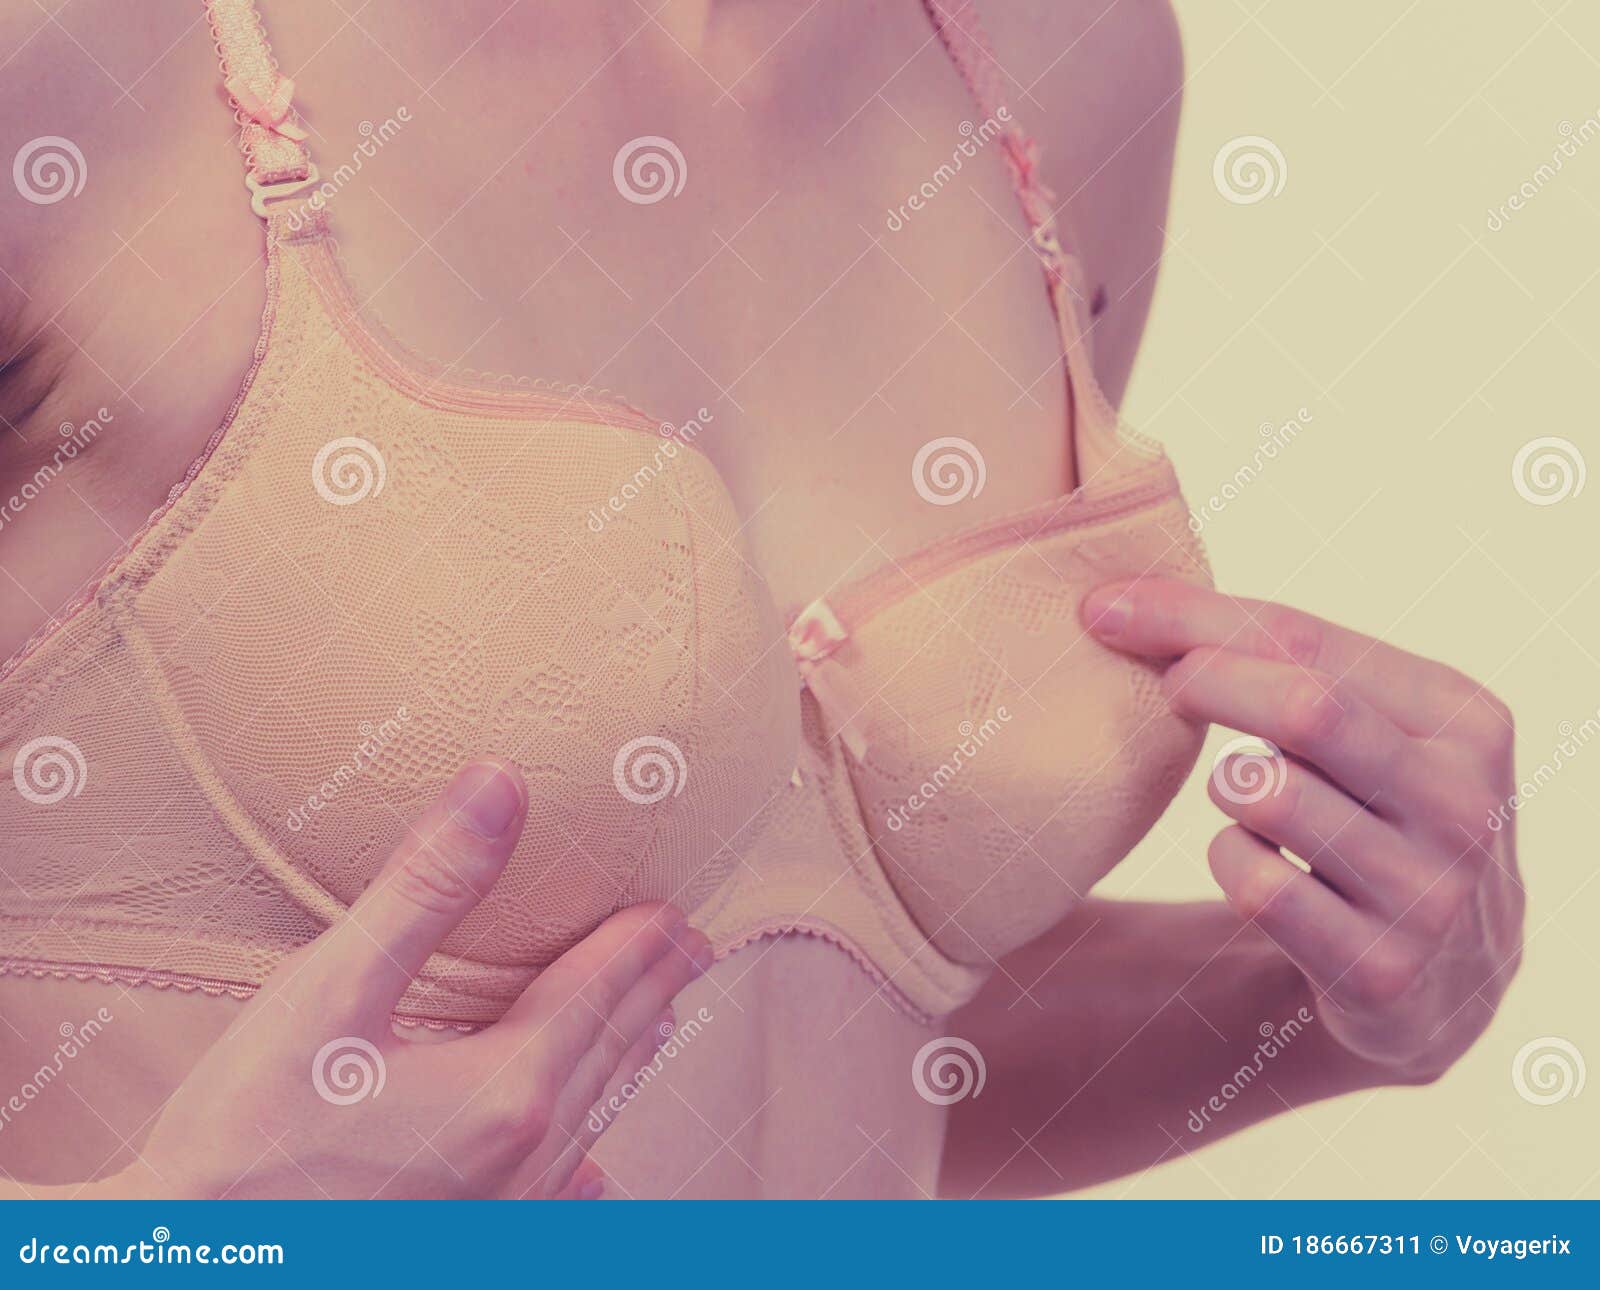 Female Wearing Too Big Bra, Wrong Size Stock Image - Image of scoop,  underwire: 193677053